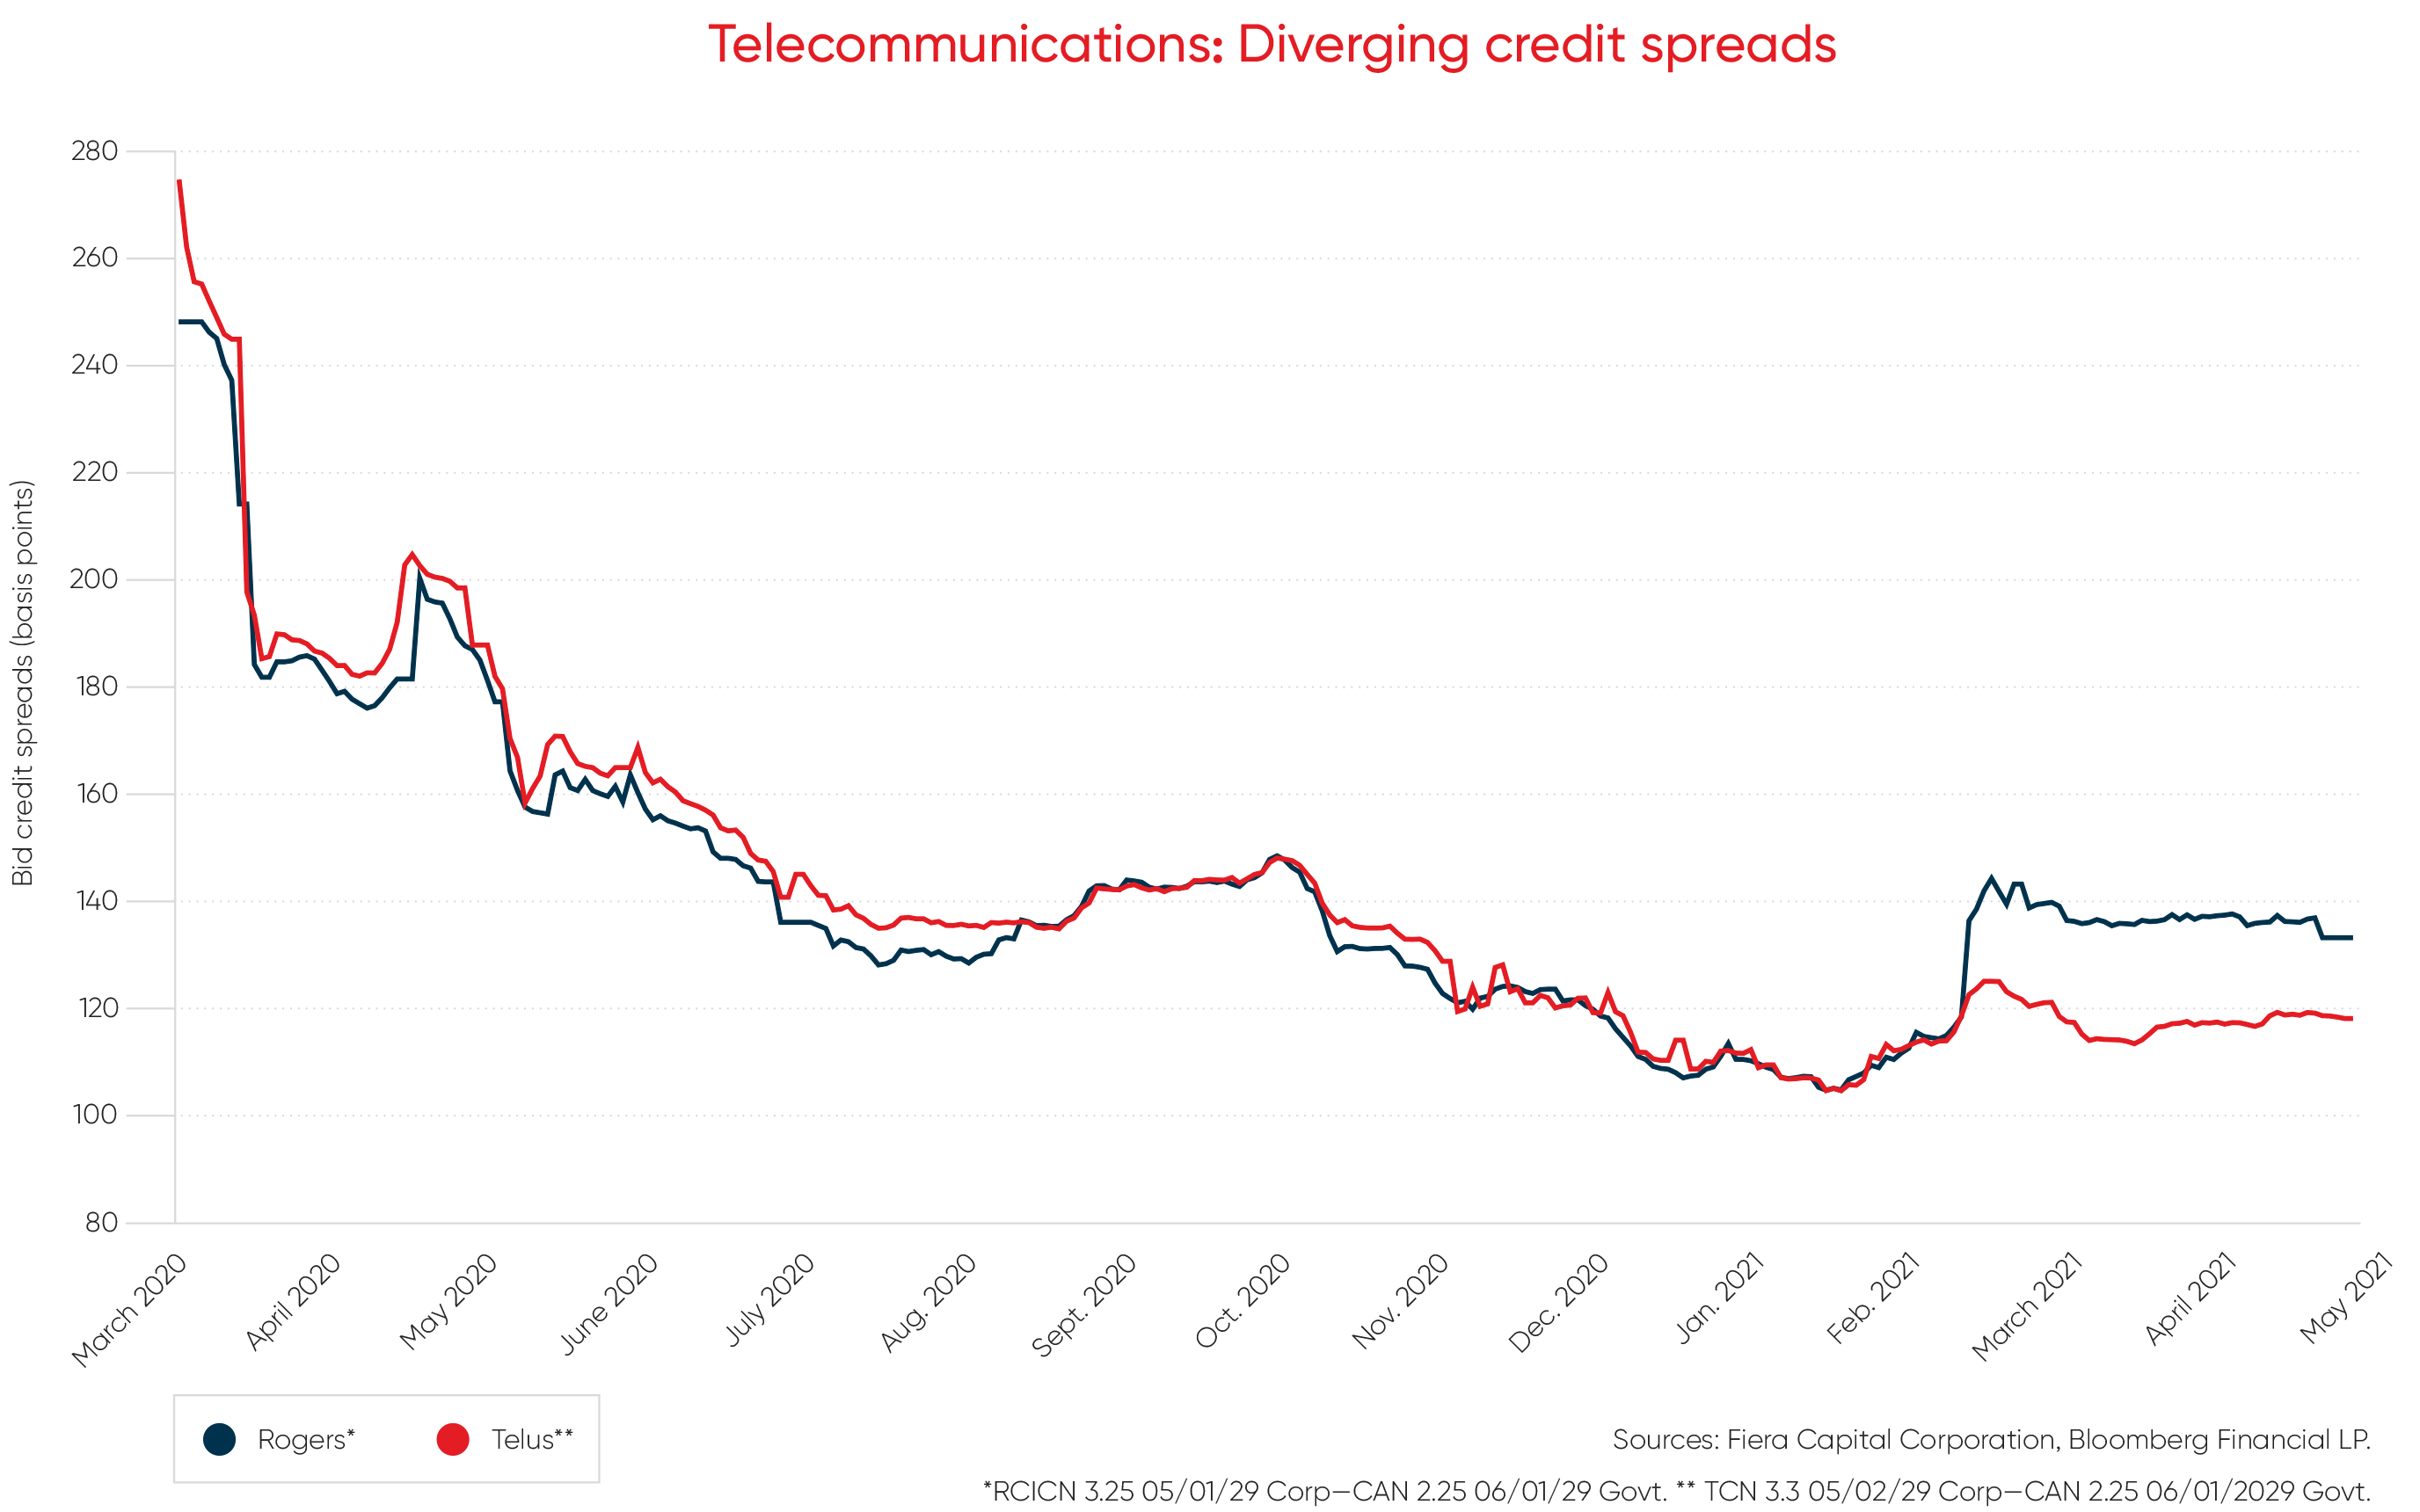 Chart showing the diverging credit spreads in the telecommunications sector